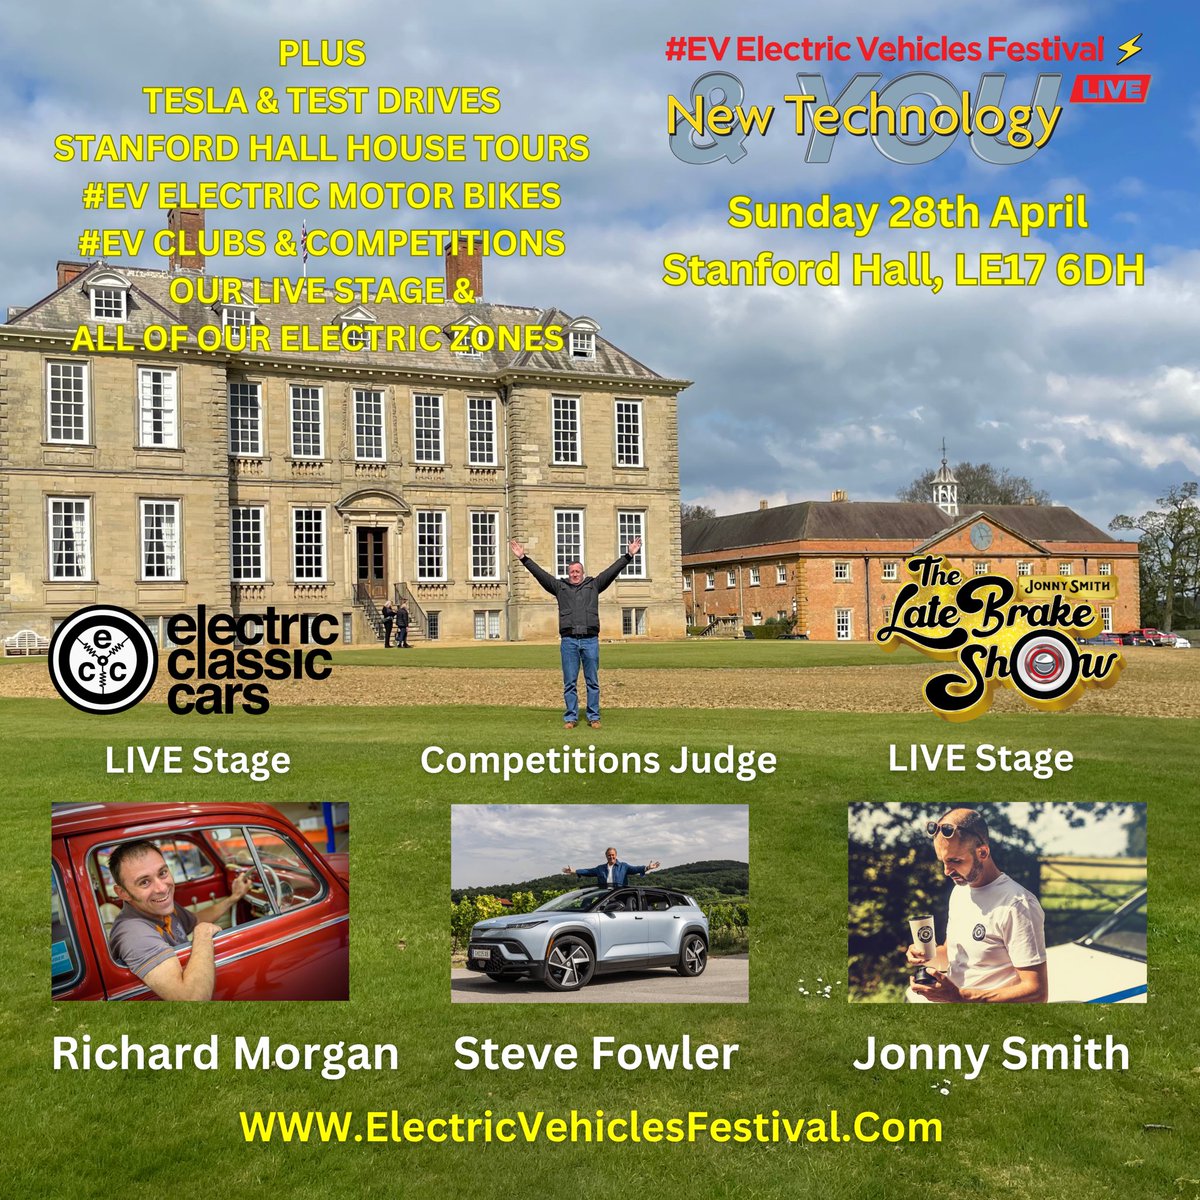 Fancy a Day Out with a difference within the beautiful grounds of Stanford Hall. Then why don’t you join us on Sunday 28th April for our Electric Vehicles Festival. We are welcoming some special guests I hope you will consider joining us. ElectricVehiclesFestival.com